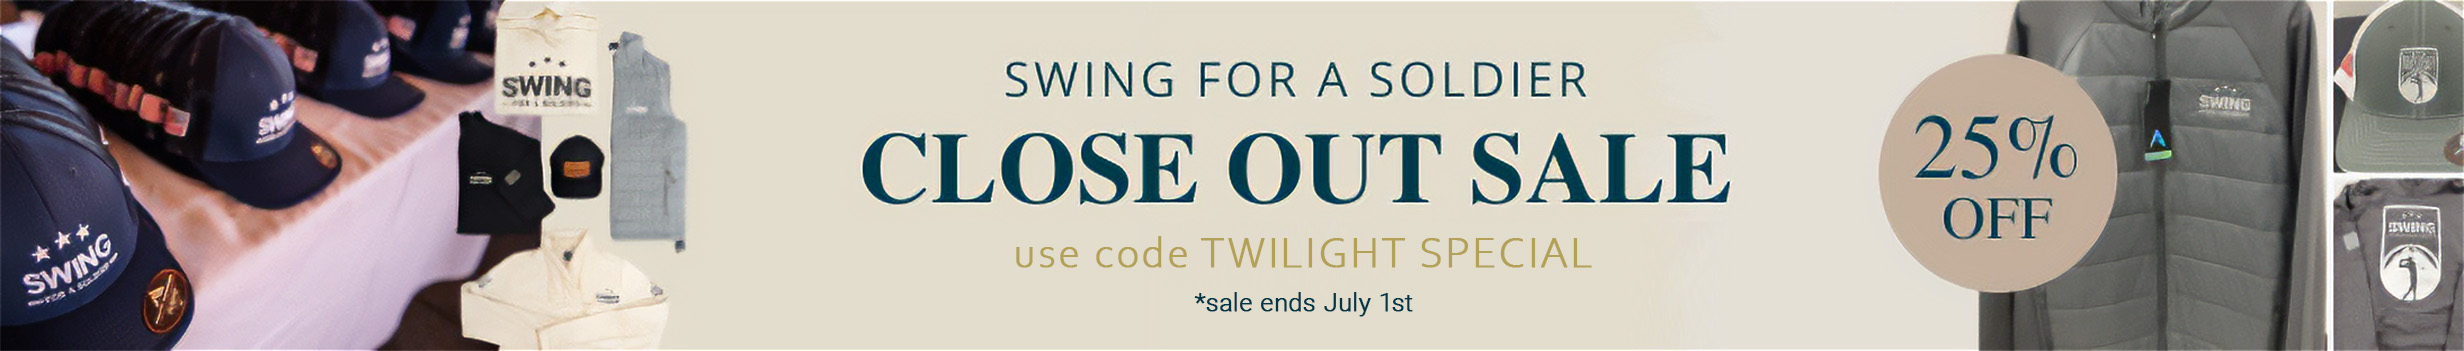 Swing For A Soldier Close Out Sale - use code TWILIGHT SPECIAL - sale ends July 1st